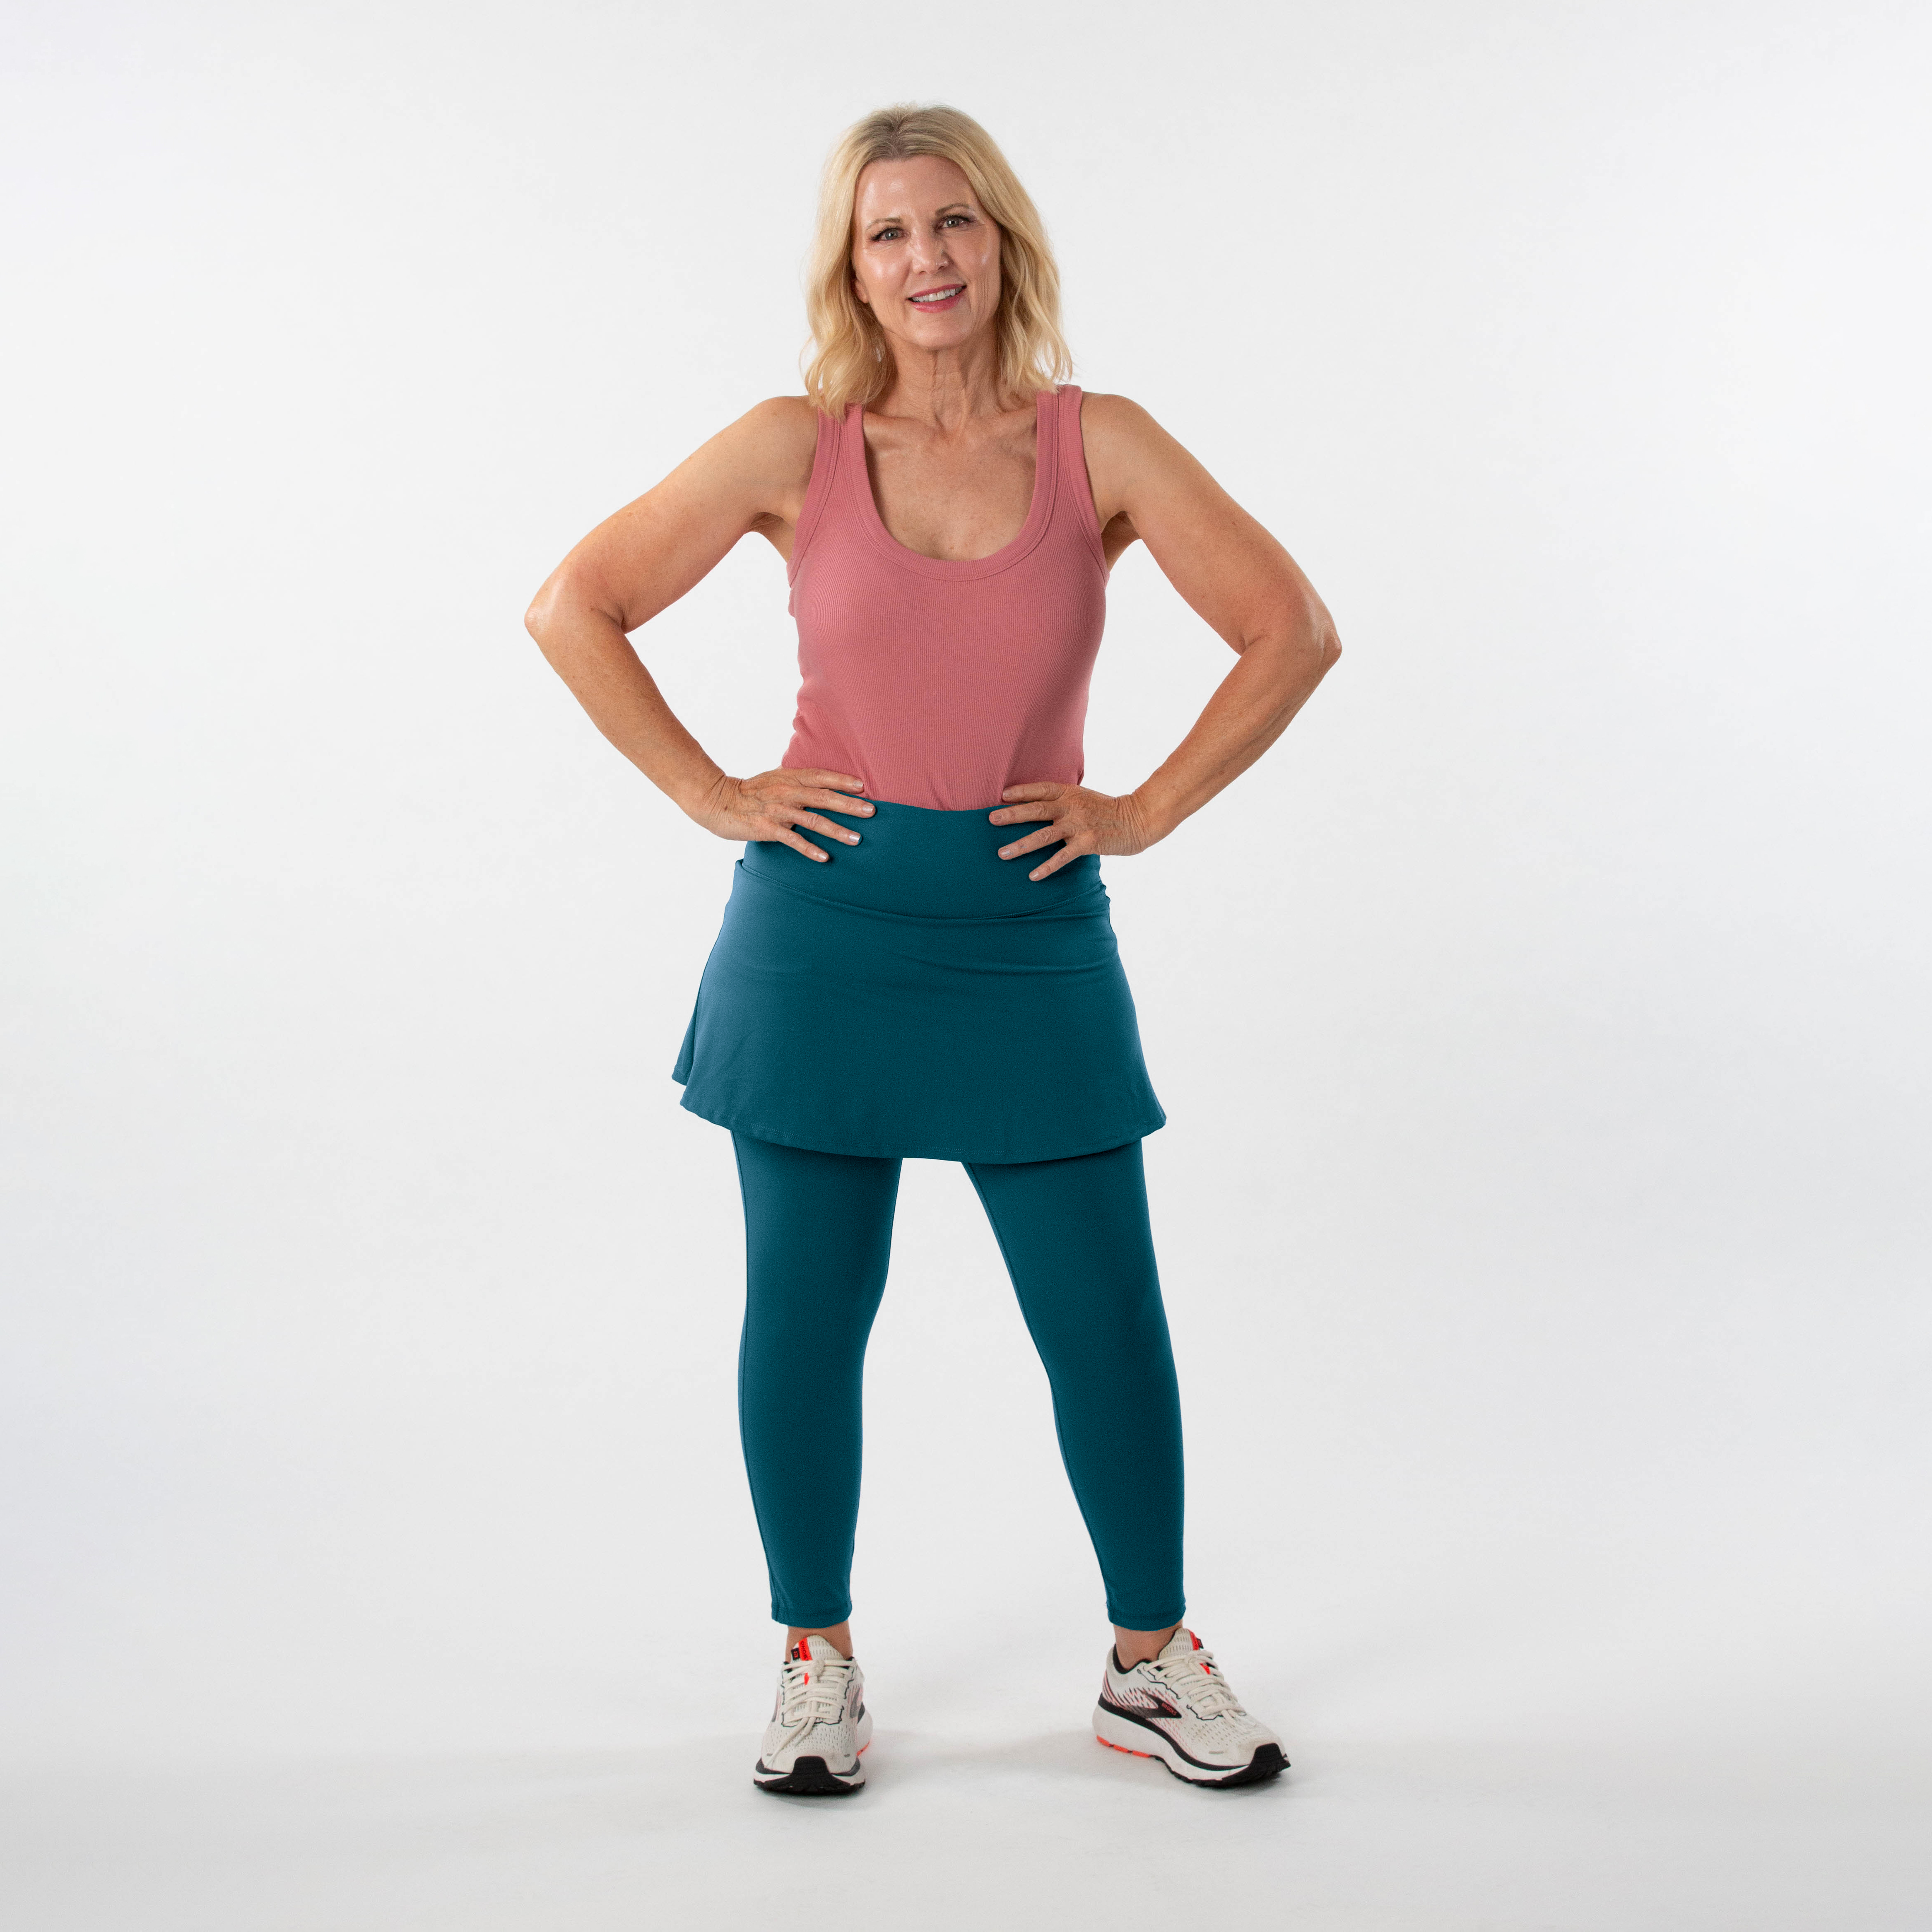 Complete Coverage A-Line Skirted Leggings W/Pockets